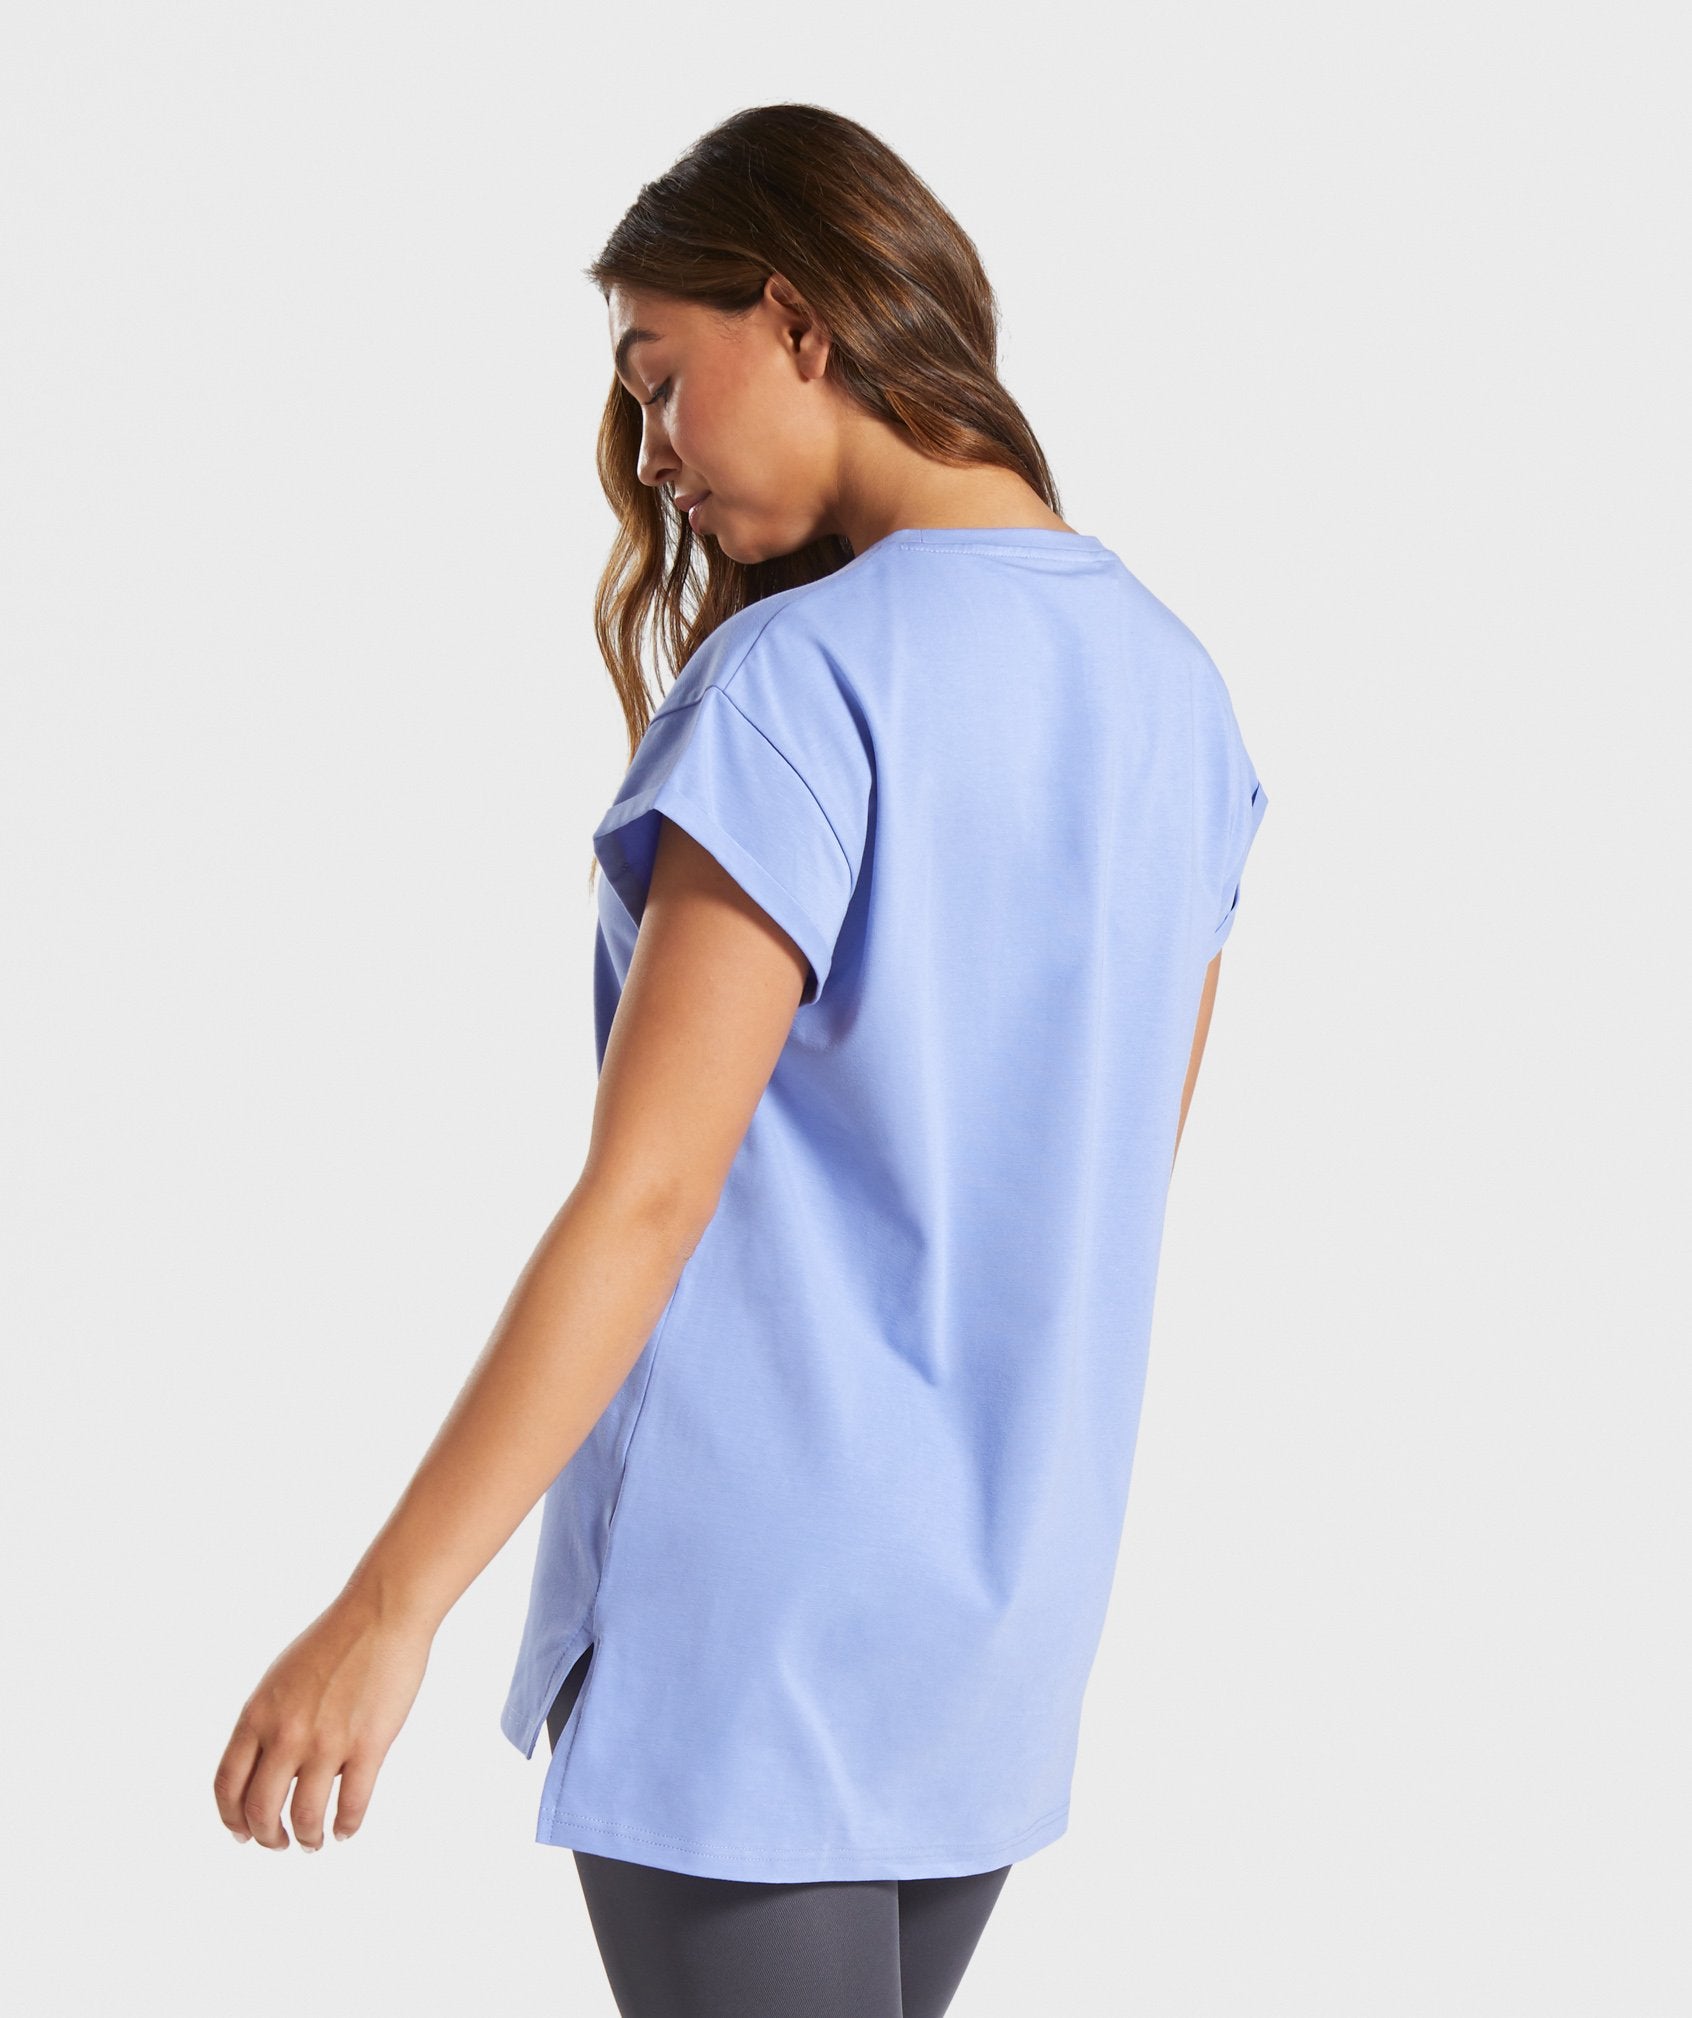 Signature Longline Tee in Light Blue - view 2